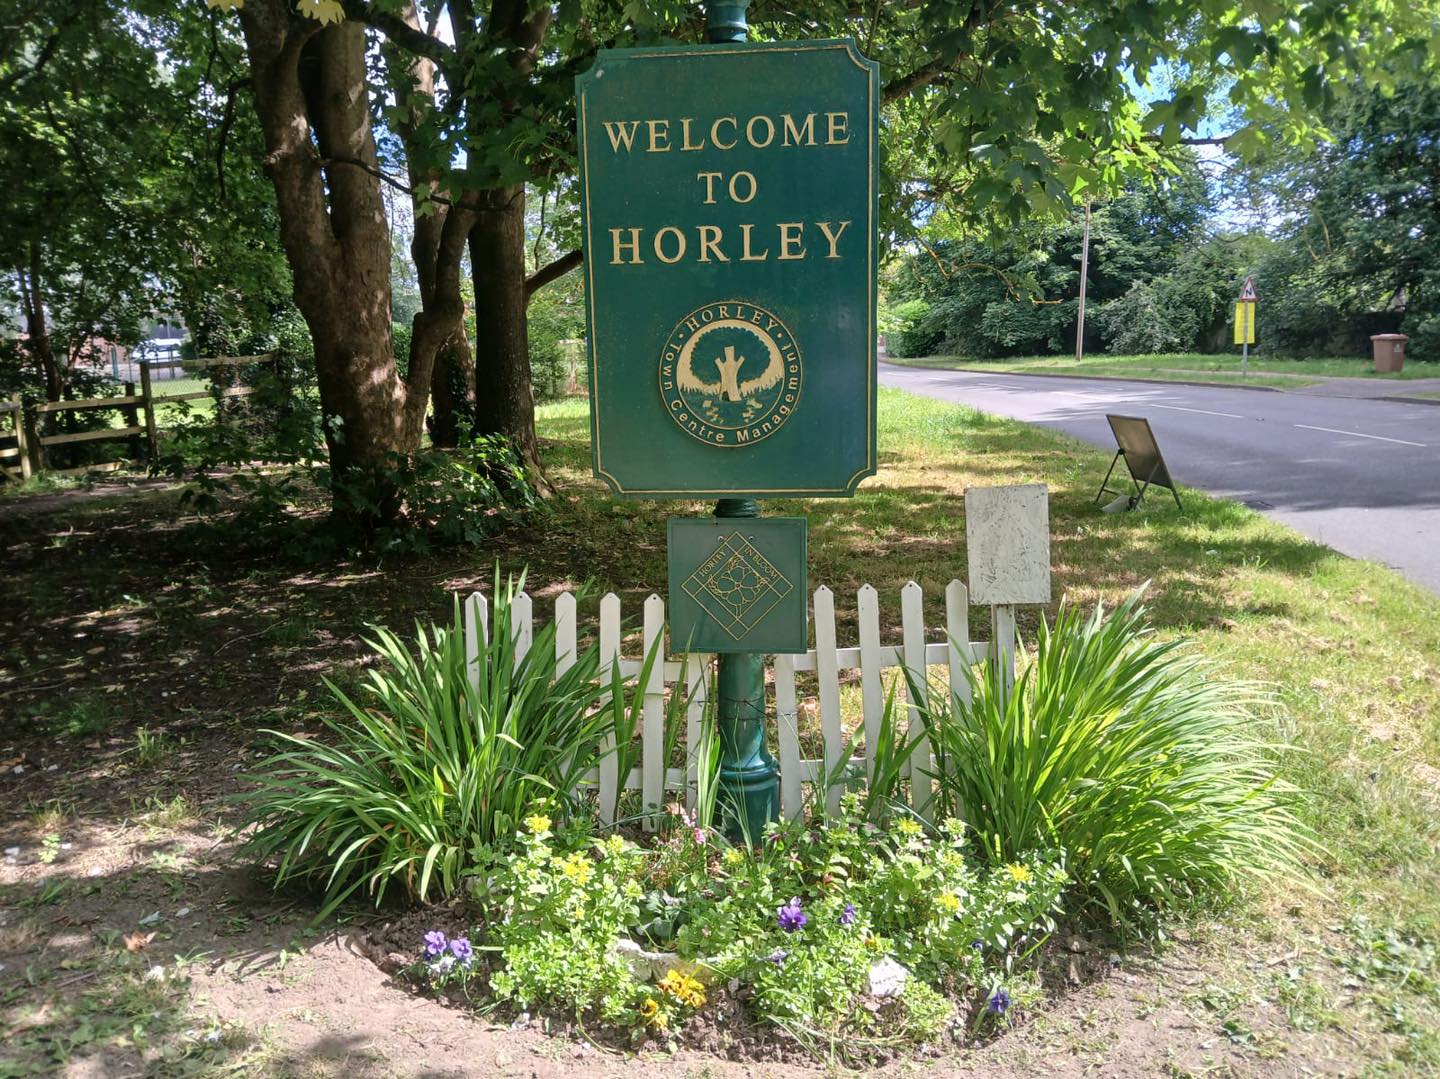 Photograph showing welcome to Horley signs